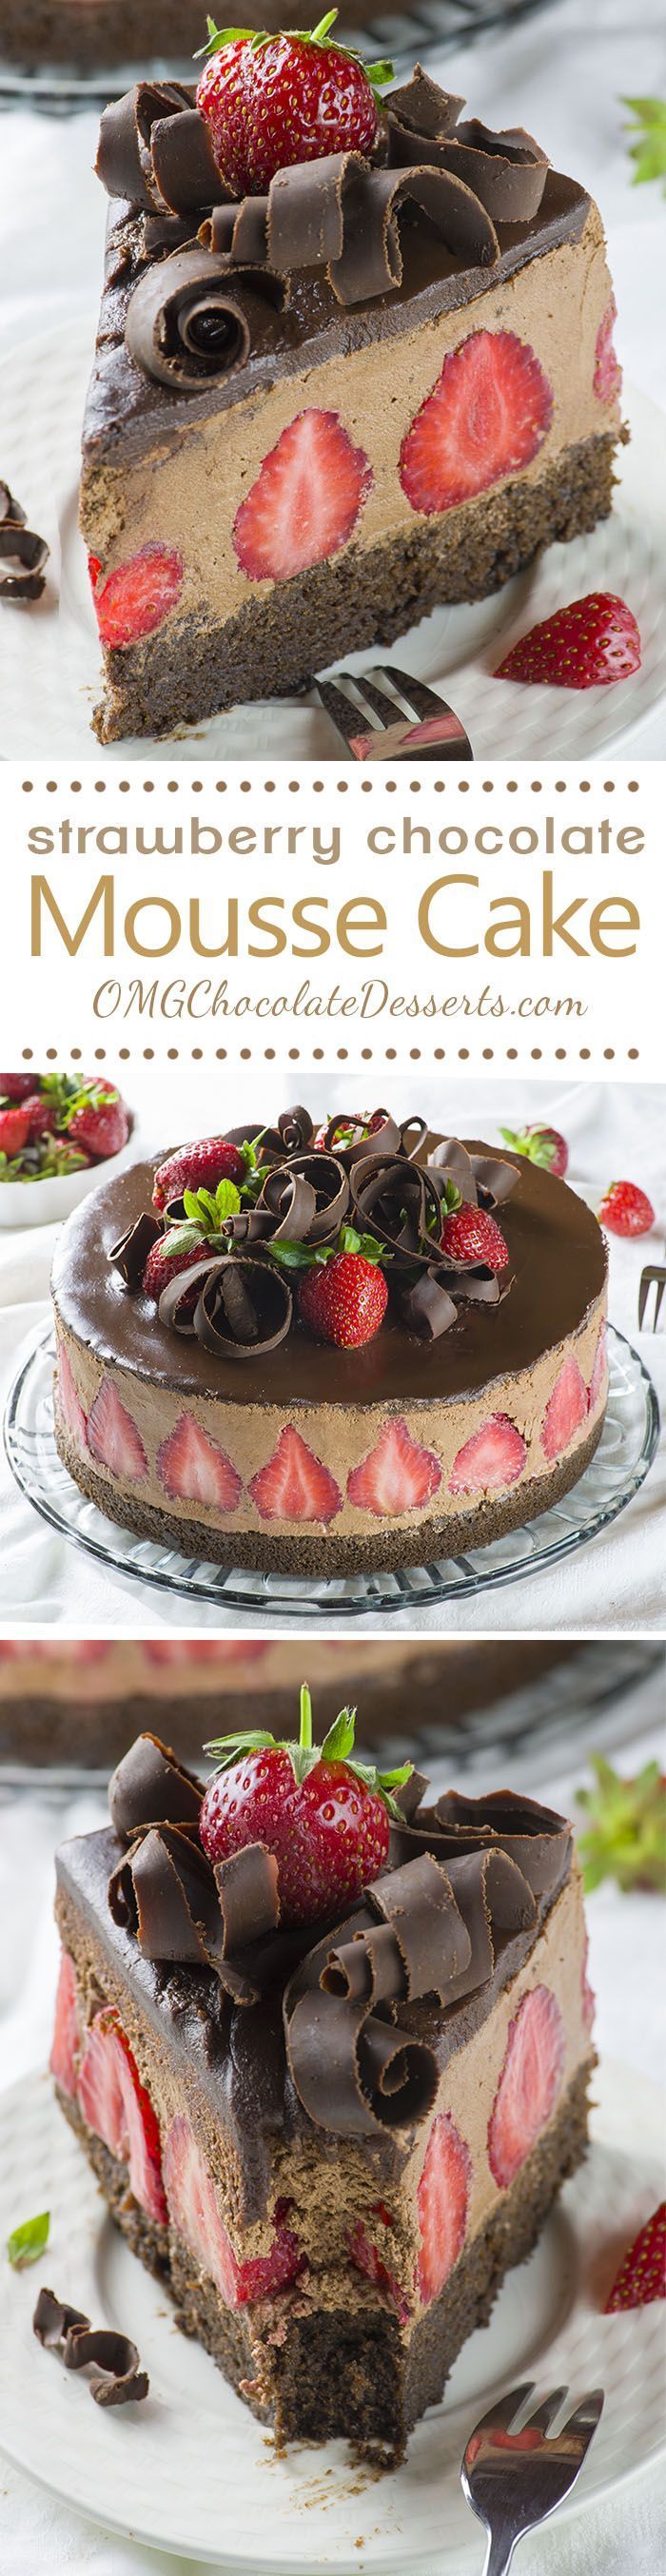 Strawberry Chocolate Cake is like the best chocolate covered strawberries you’ve ever eaten!!!